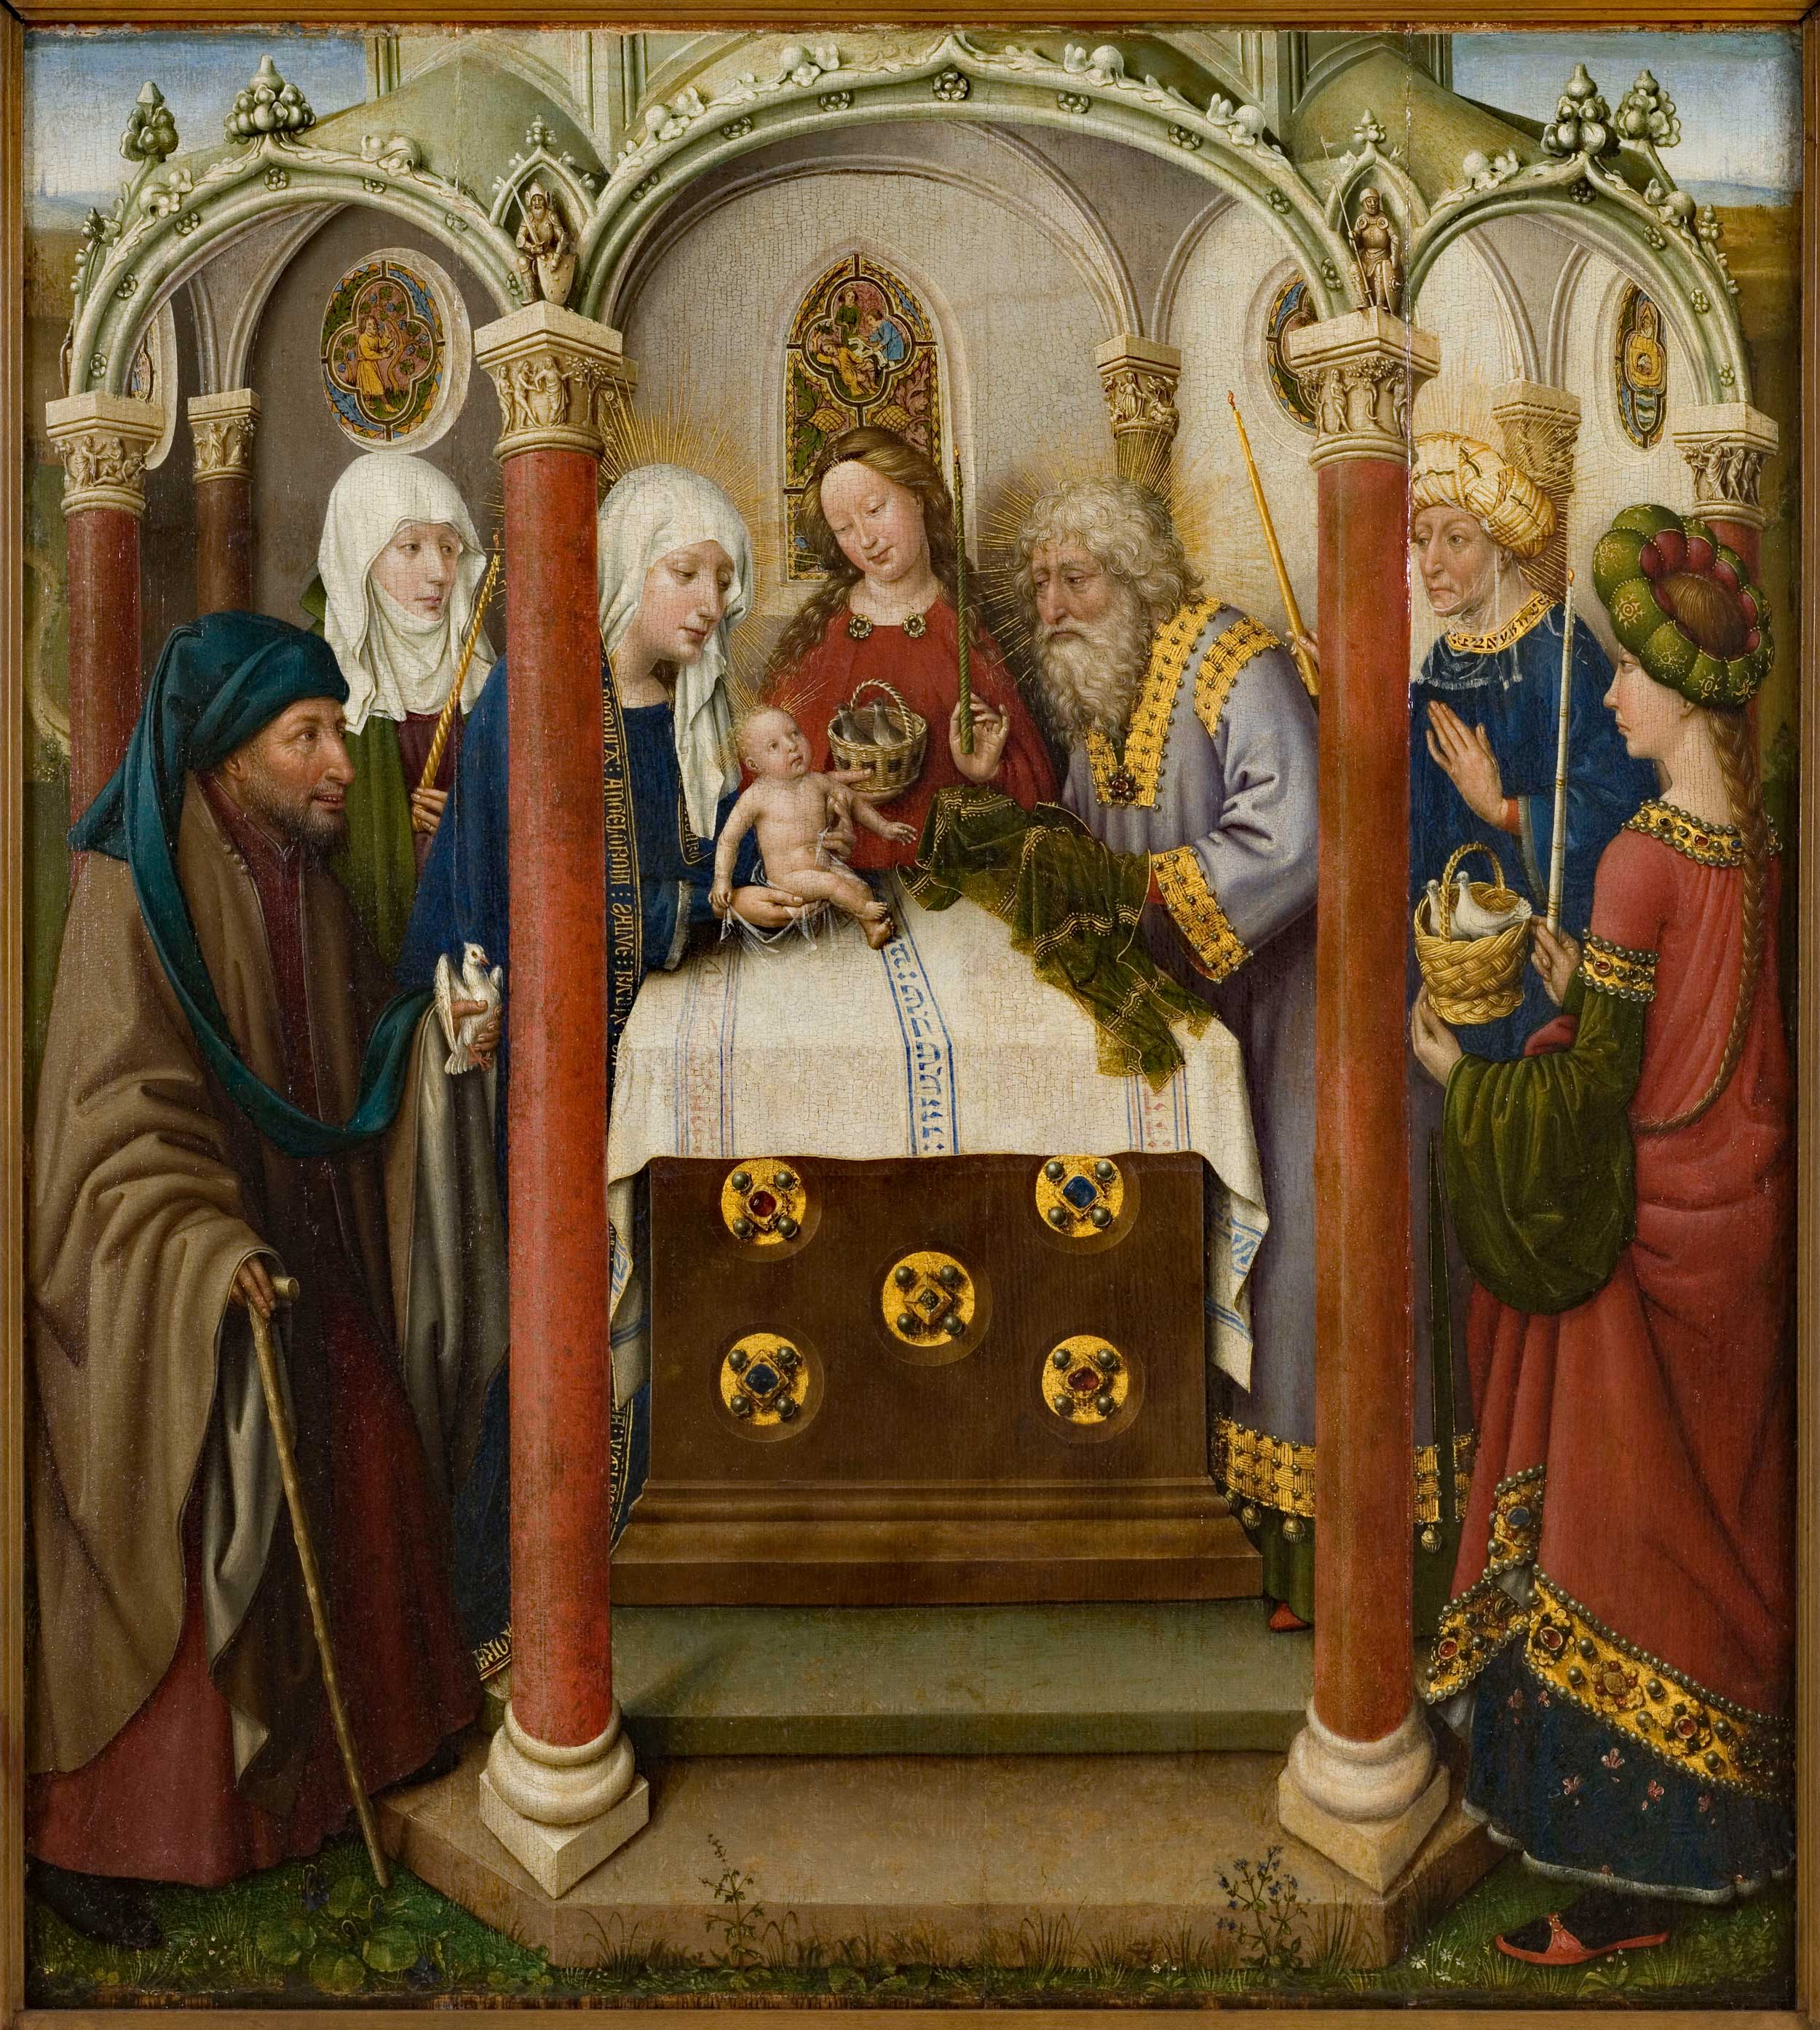 The Presentation in the Temple, painting by Jacques Daret from around 1434. The figure with the long grey beard is Simeon.